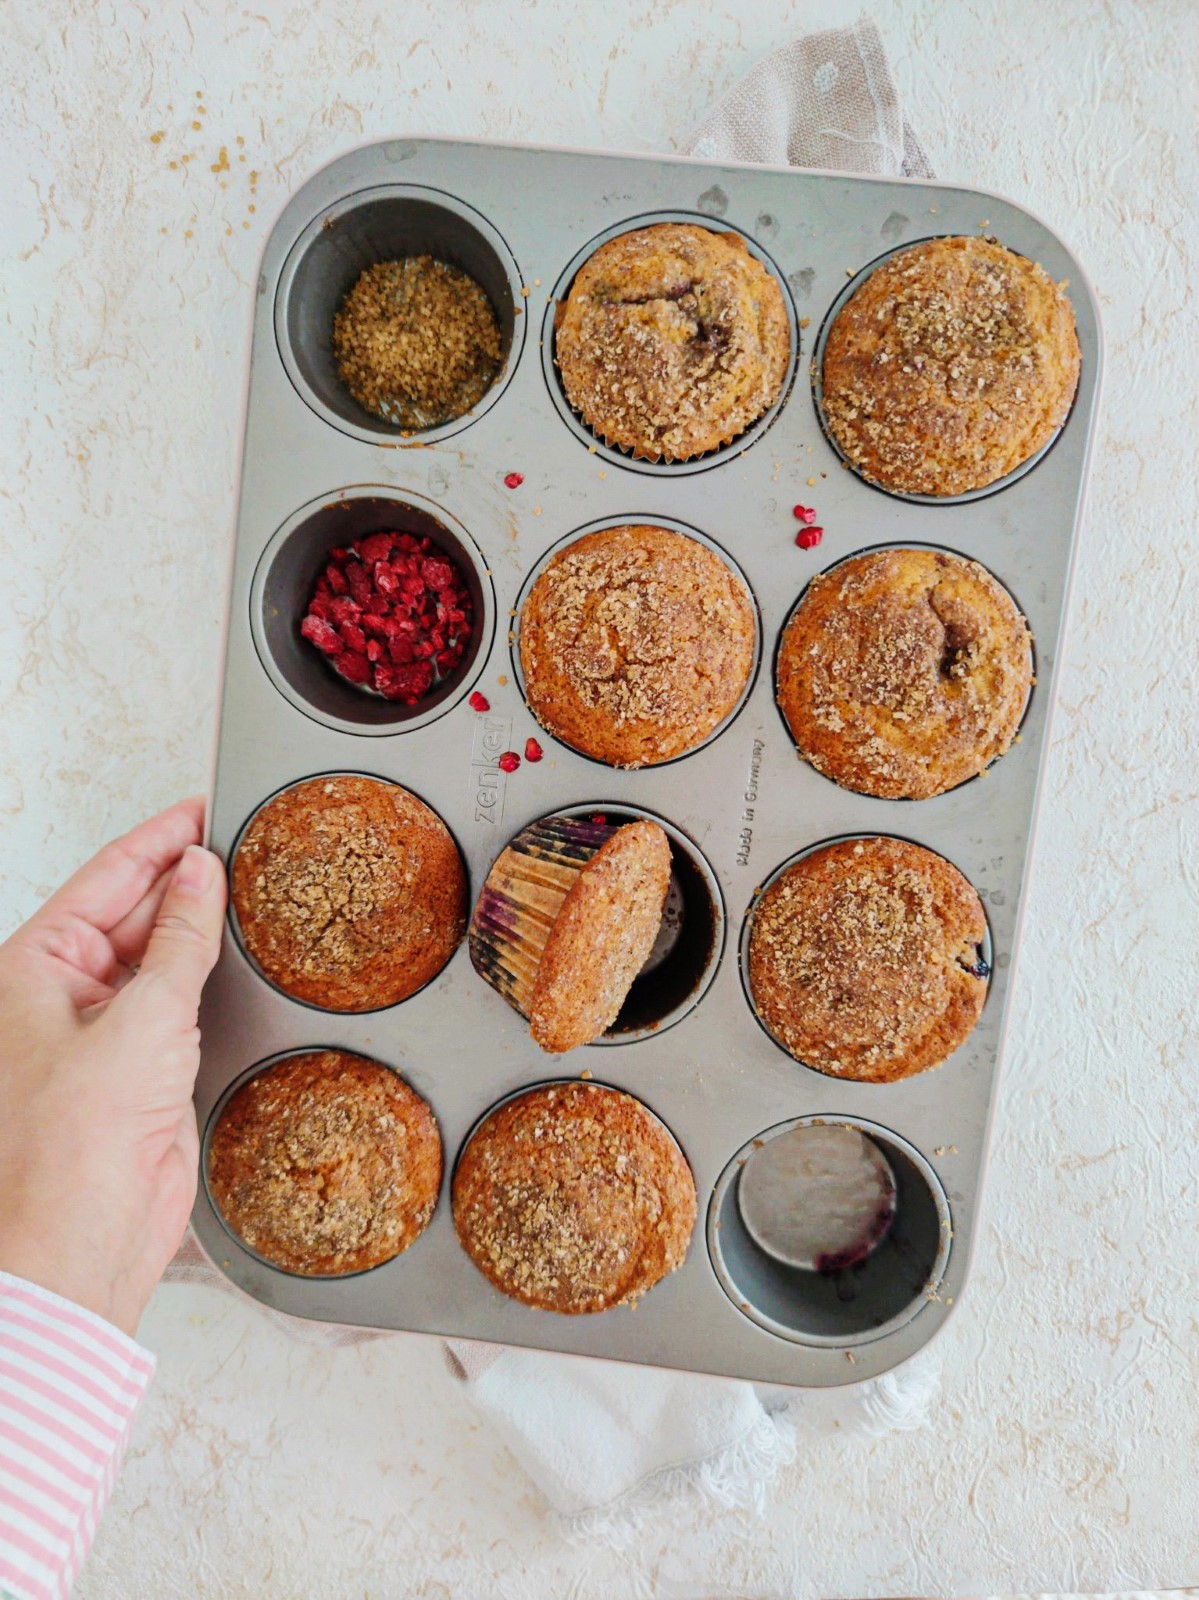 Muffins with Berries and Streusel Topping - Muffins with berries and streusel topping